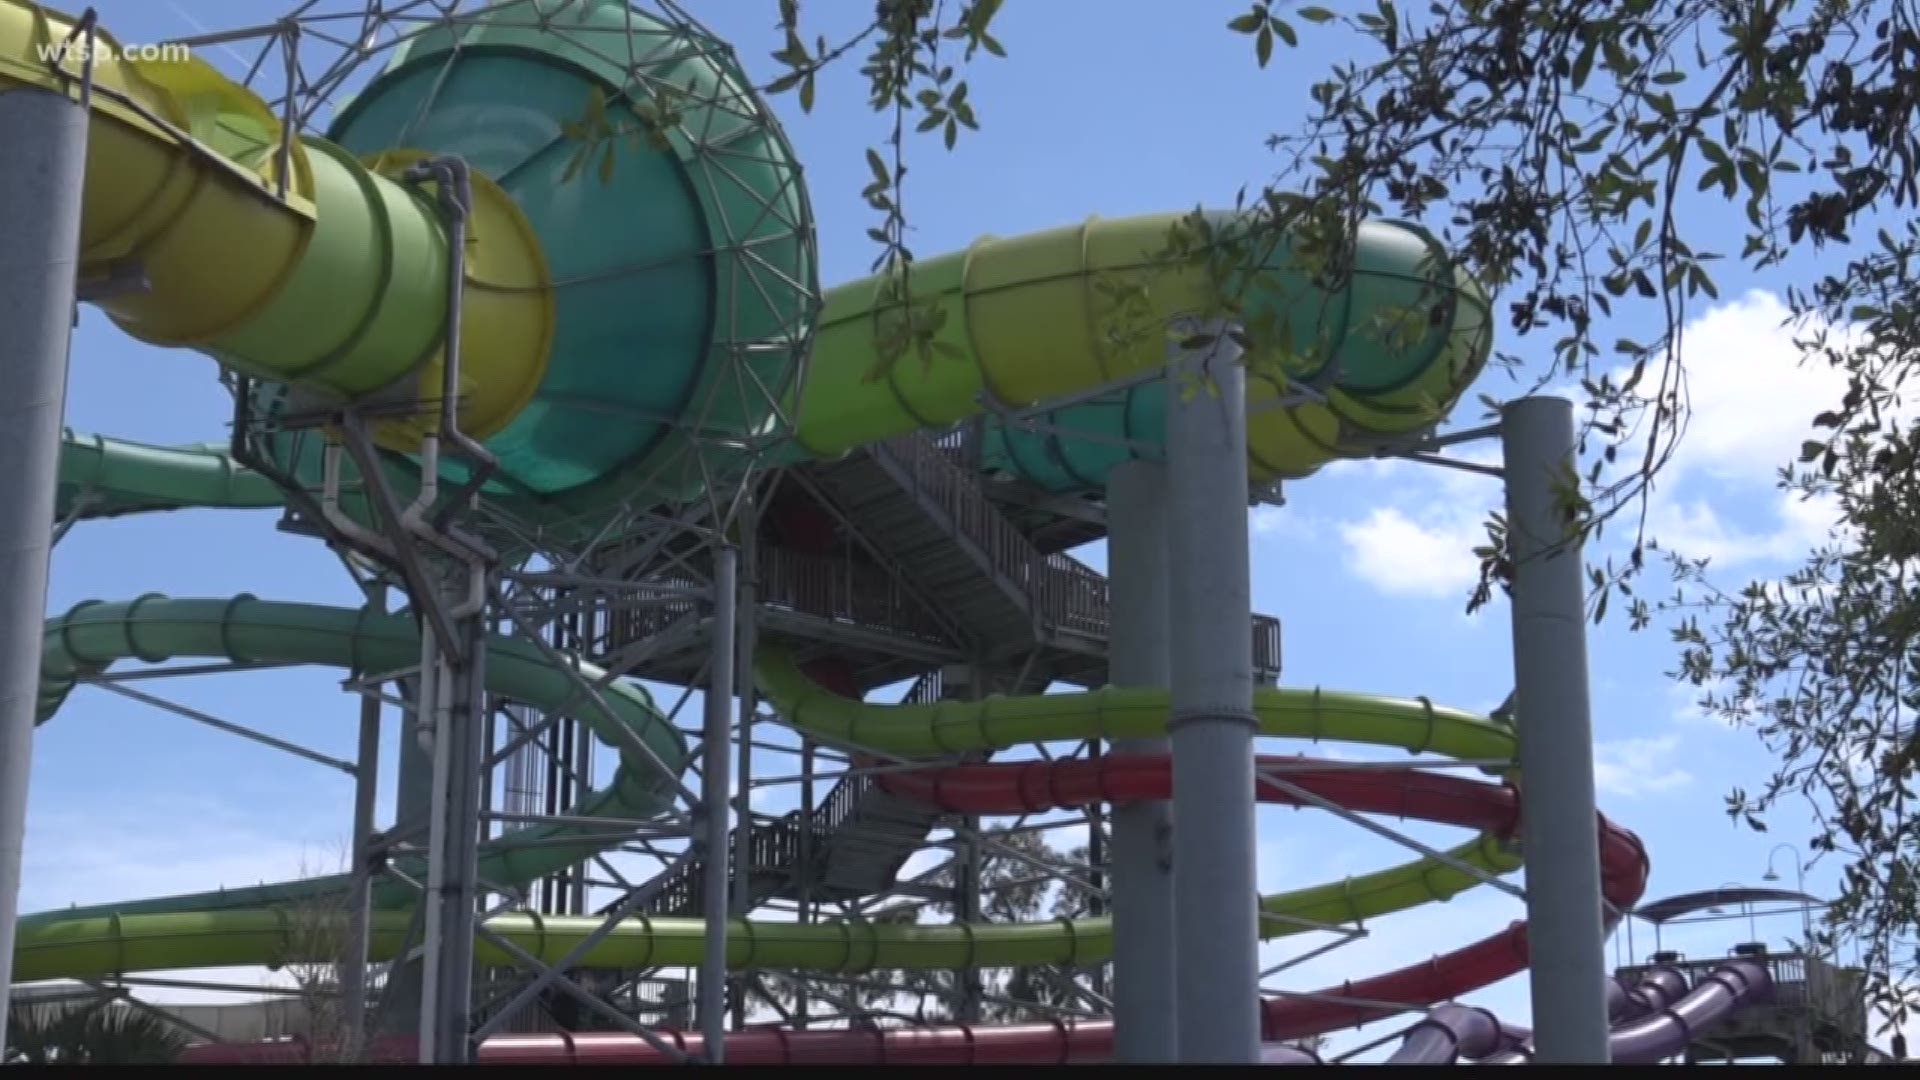 The Tampa water park is next to Busch Gardens.